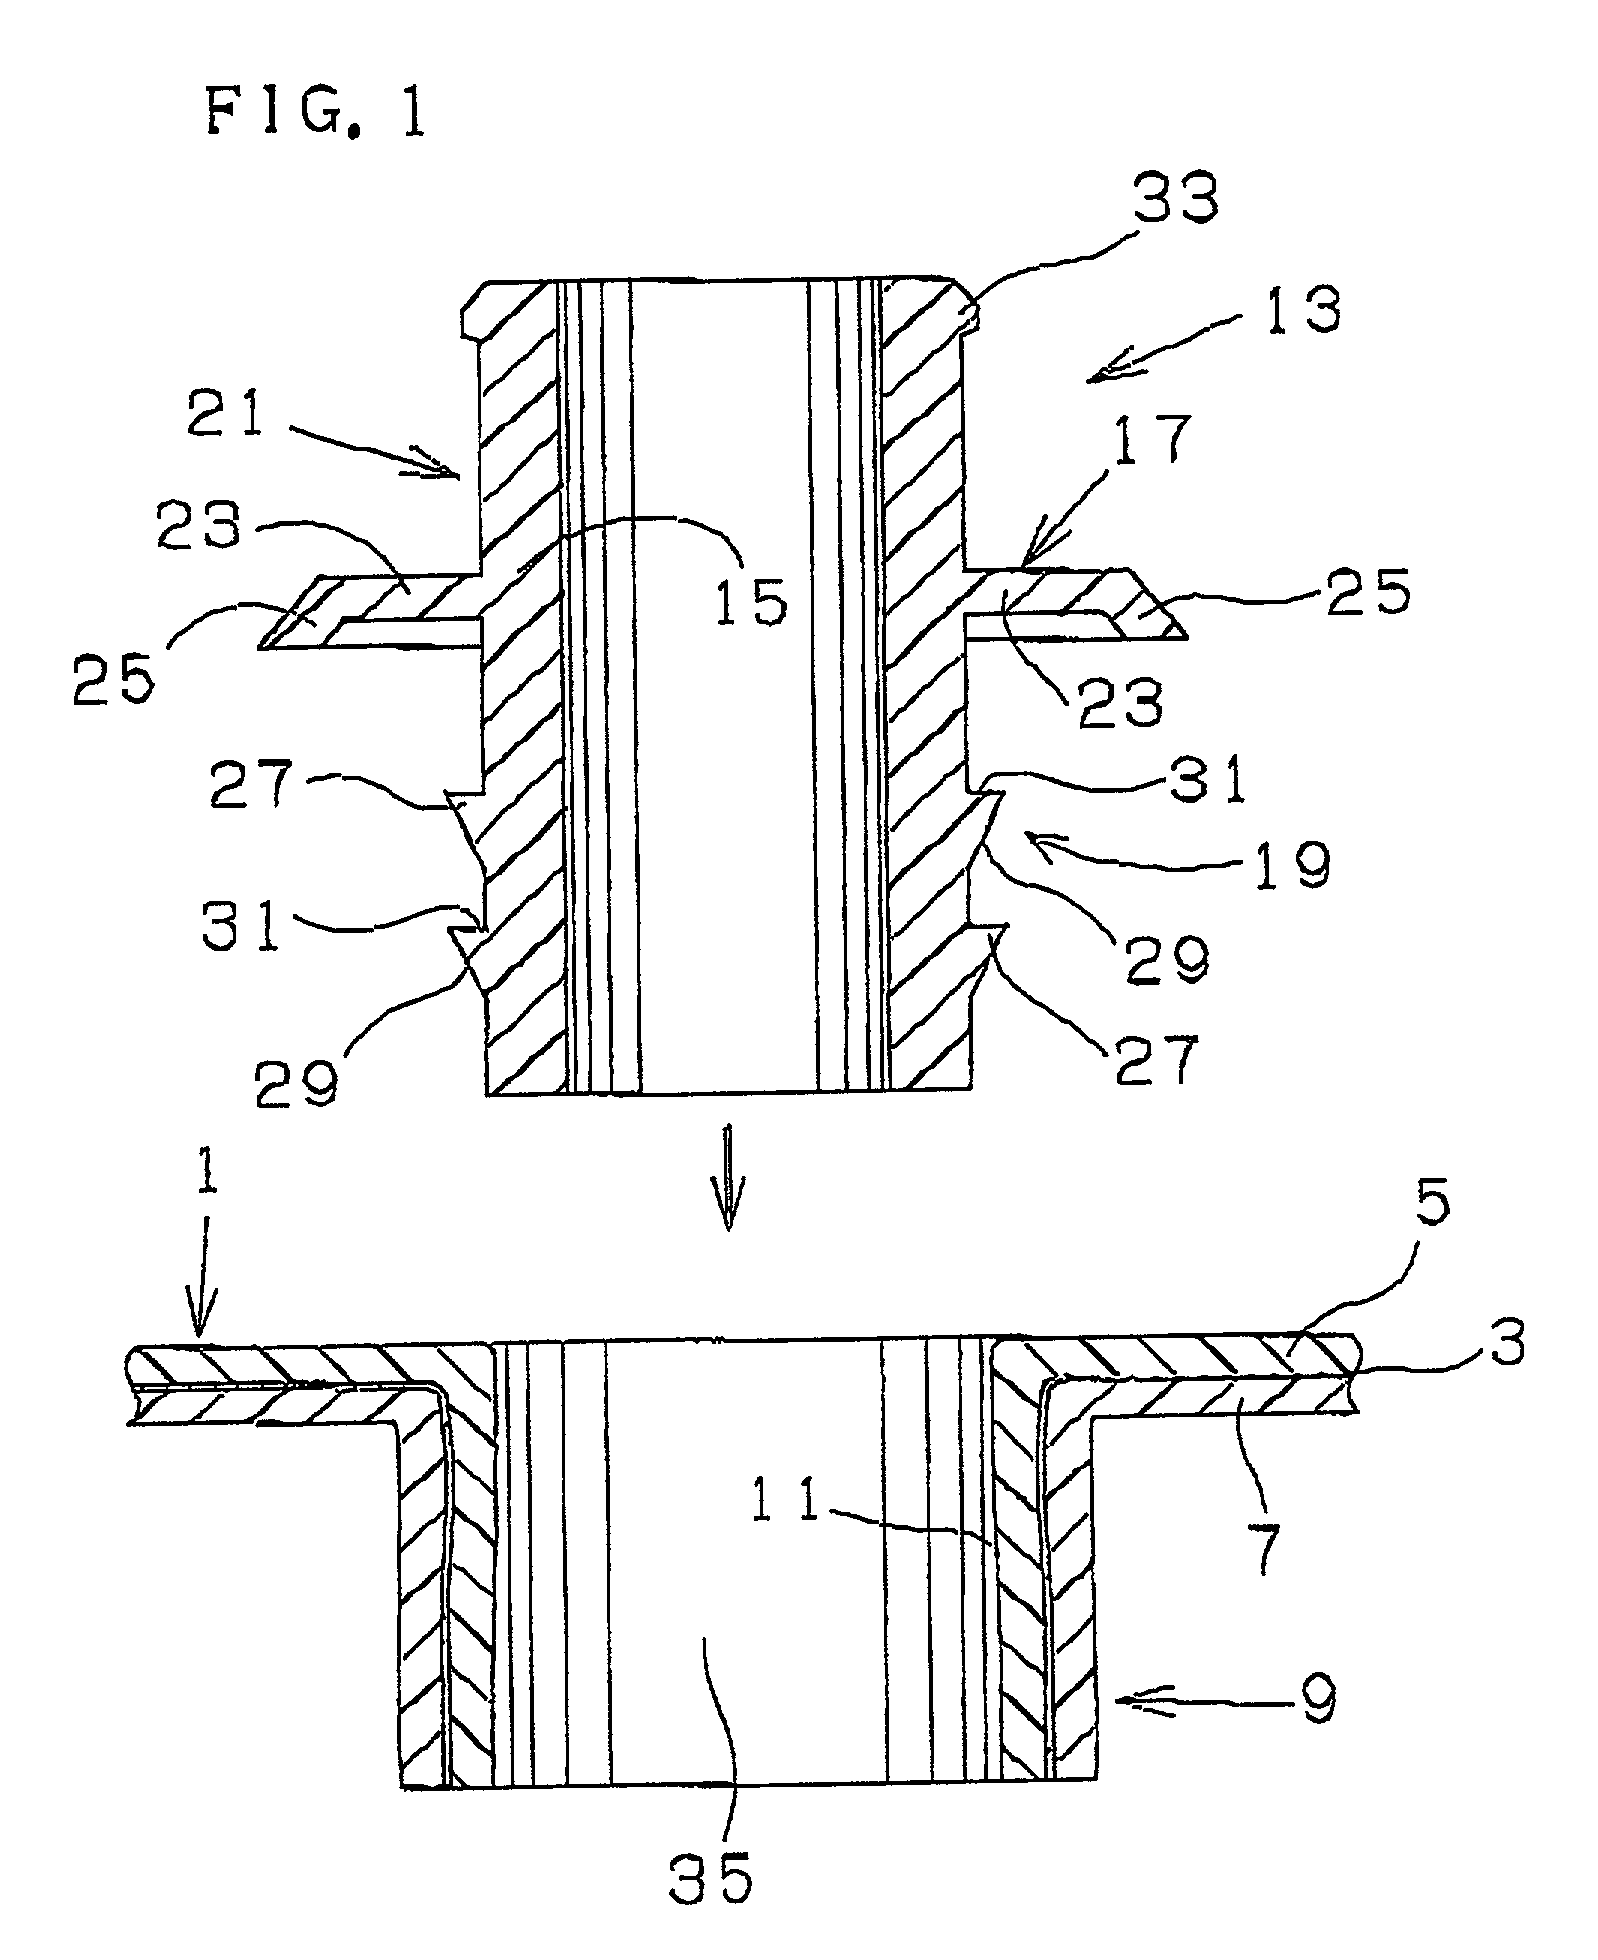 Structure for connecting tubular member to fuel tank